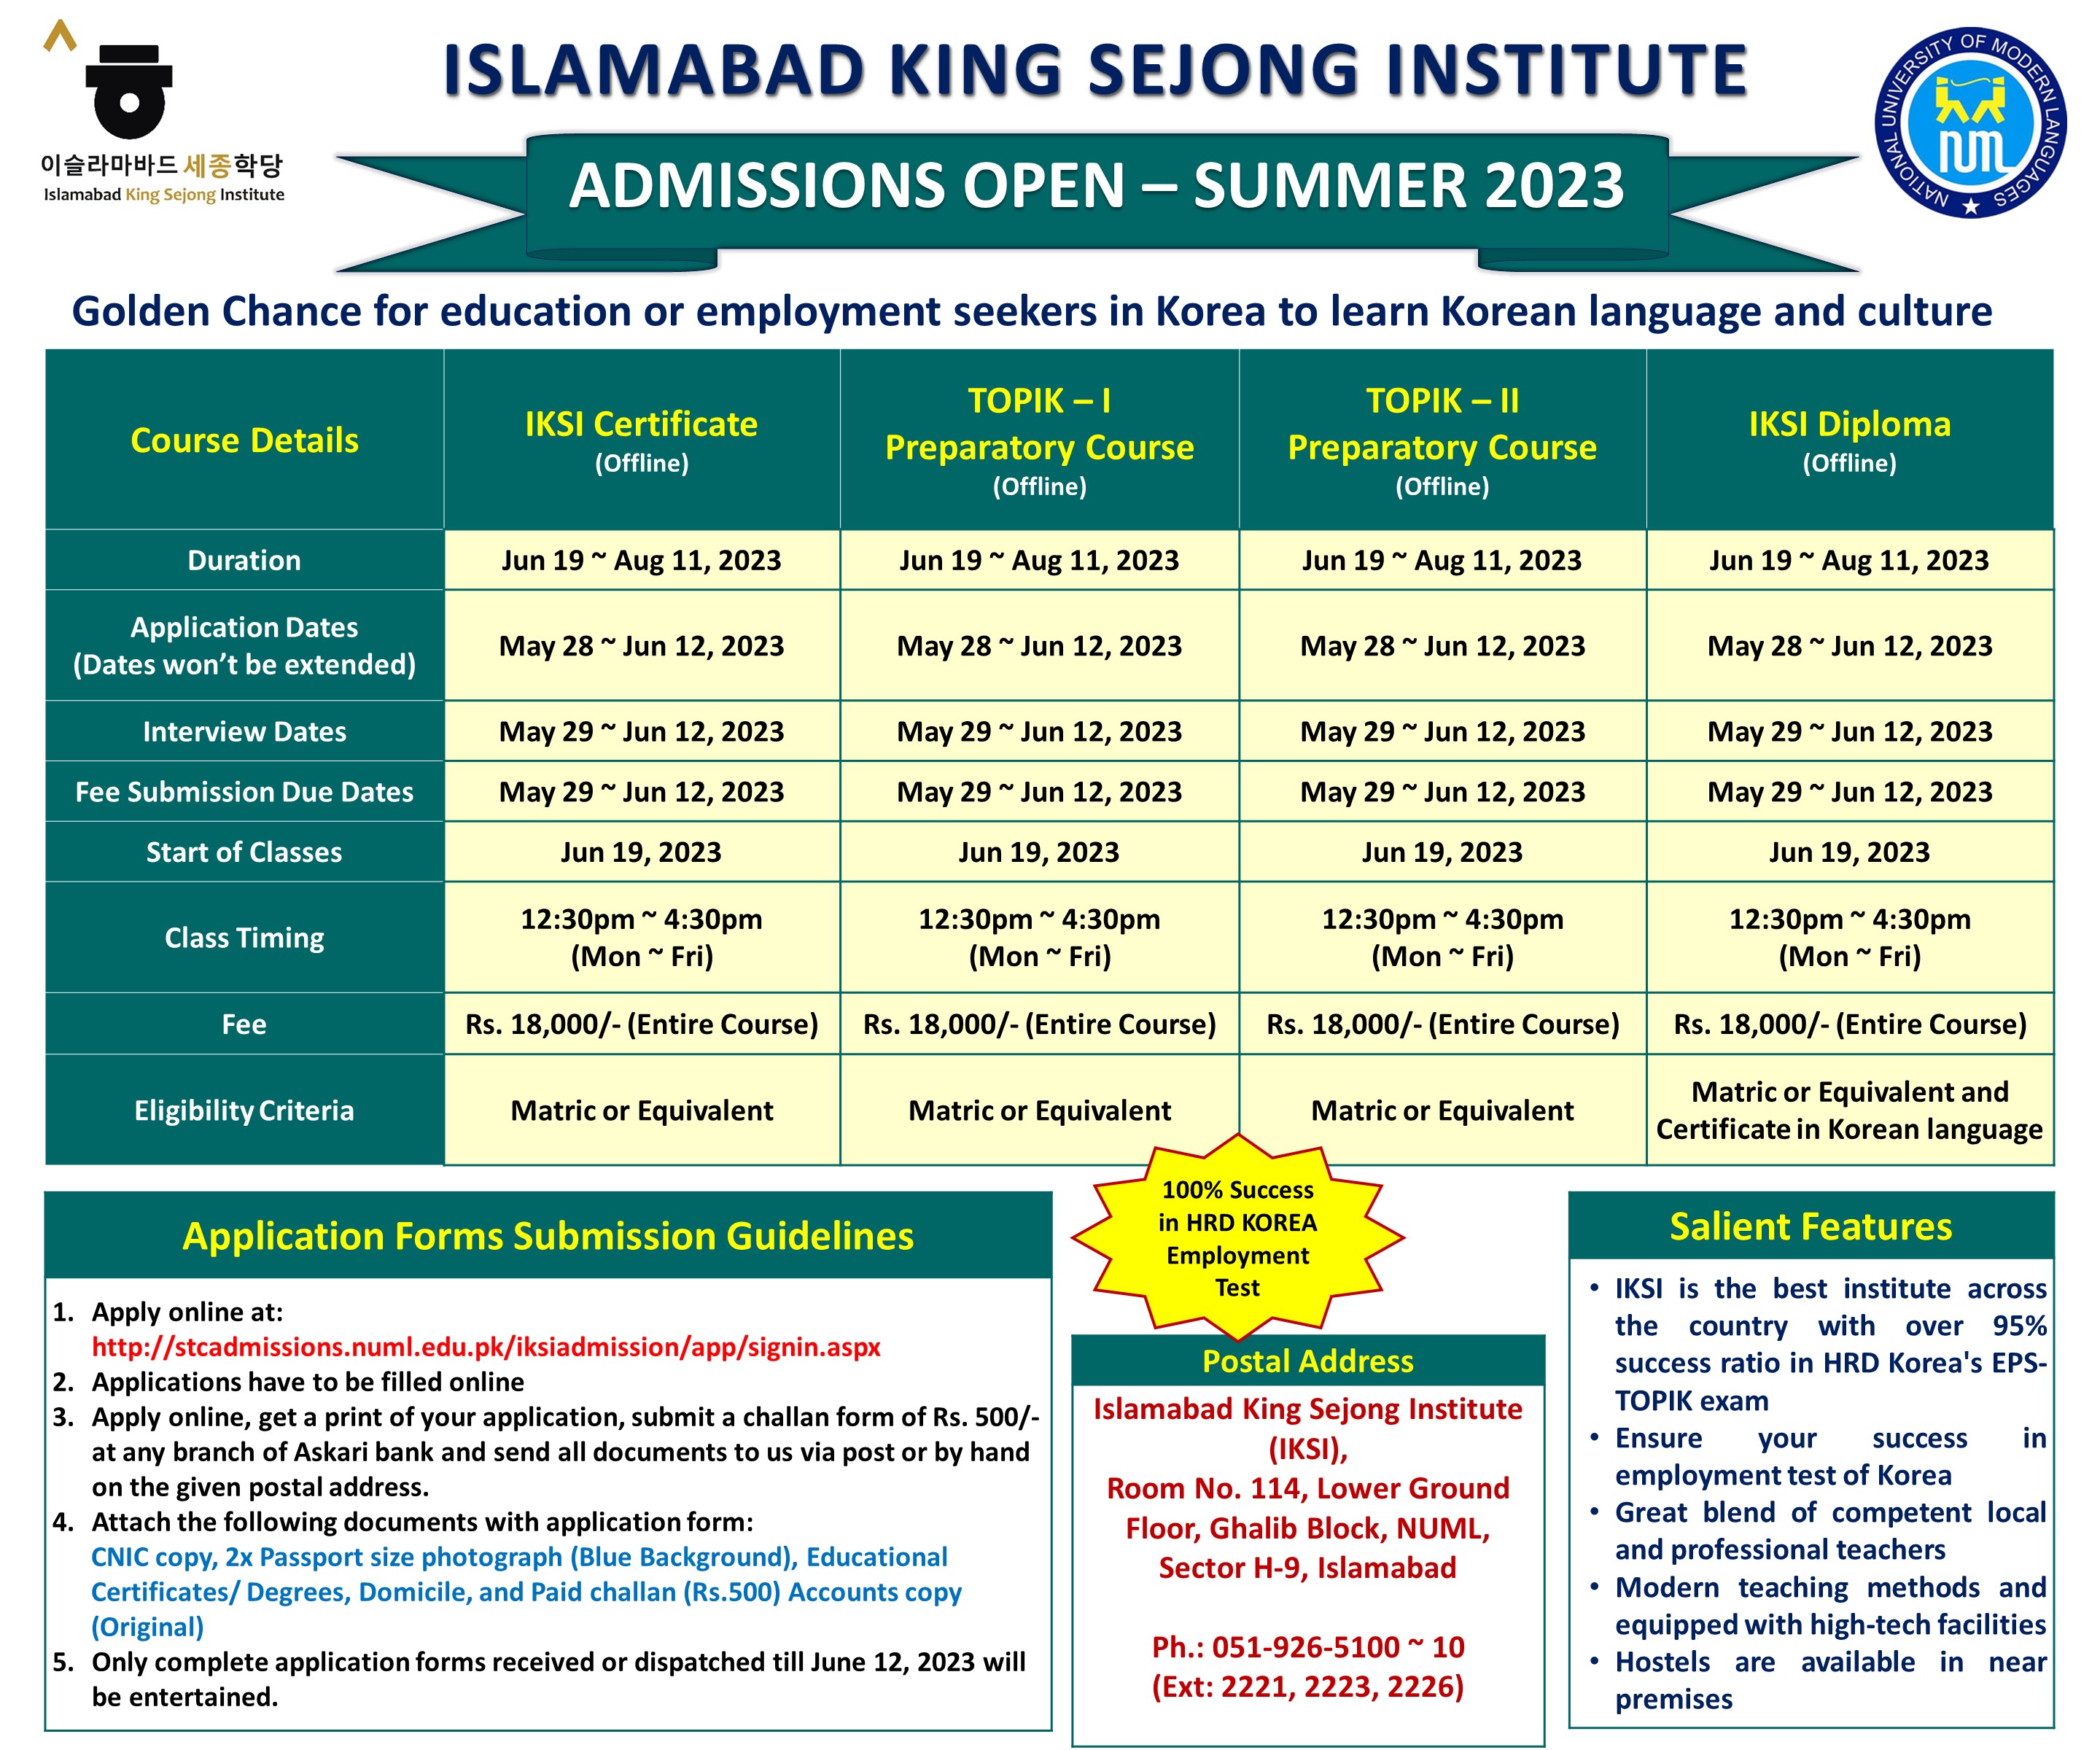 ISLAMABAD KING SEJONG INSTITUTE - ADMISSIONS OPEN SUMMER 2023